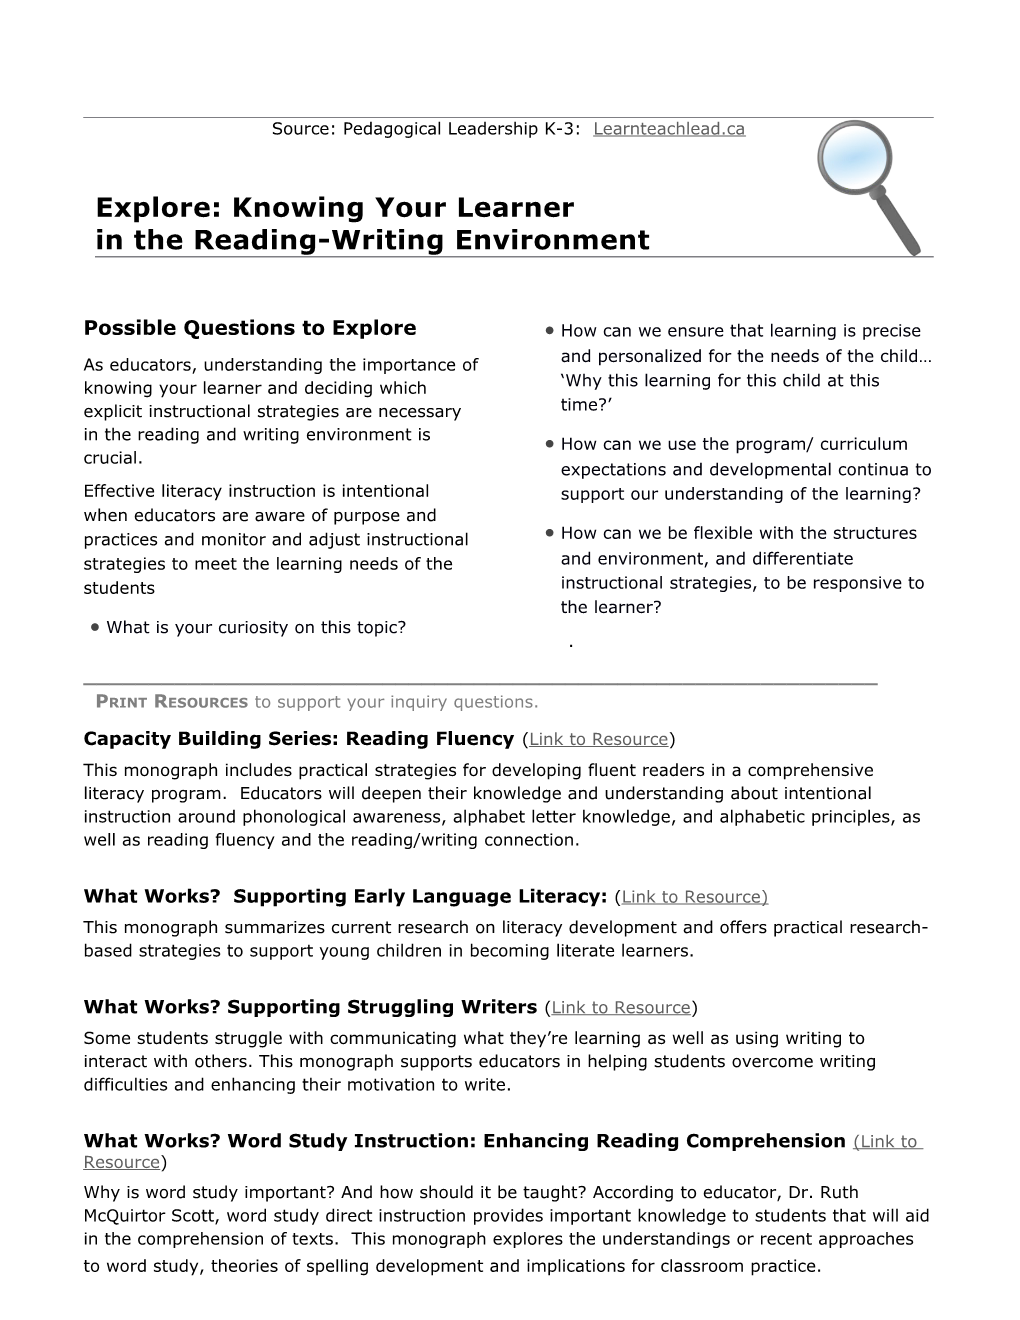 Explore: Knowing Your Learner